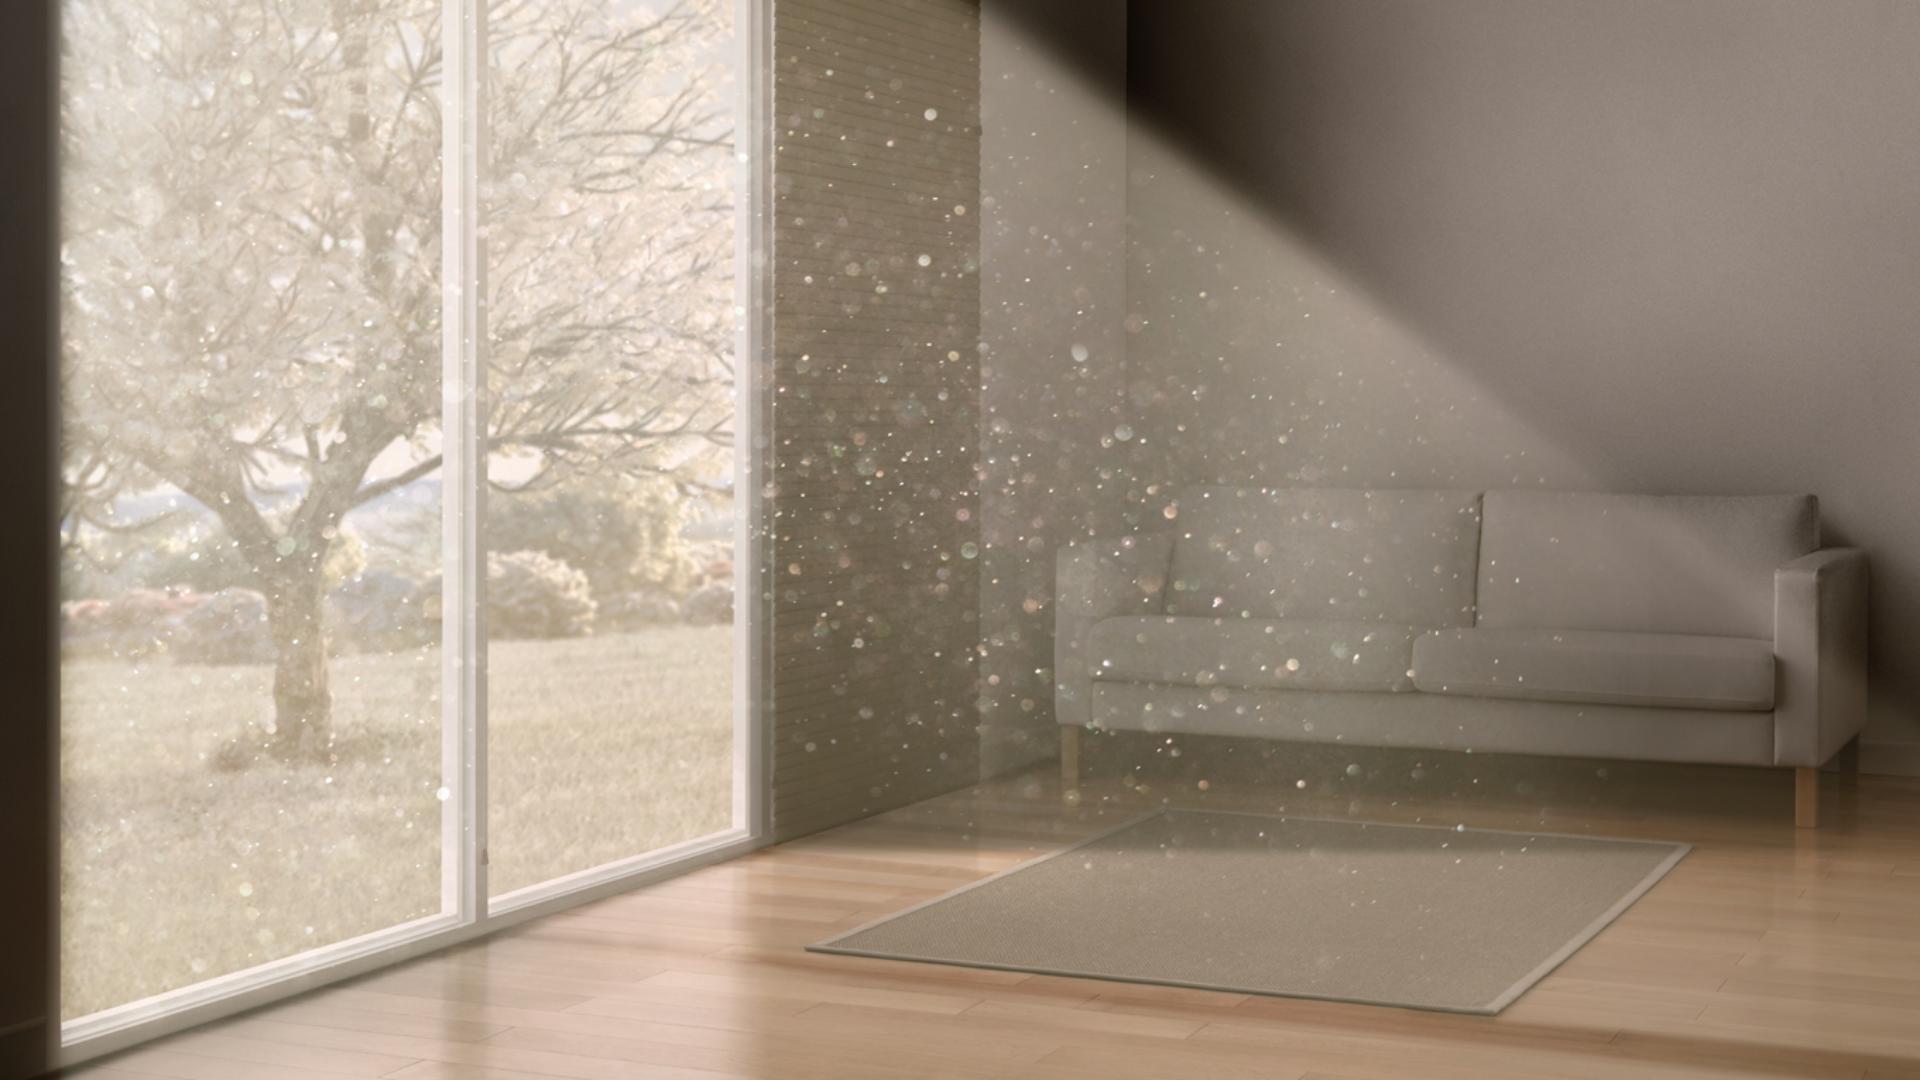 Pollen and dust in a room.